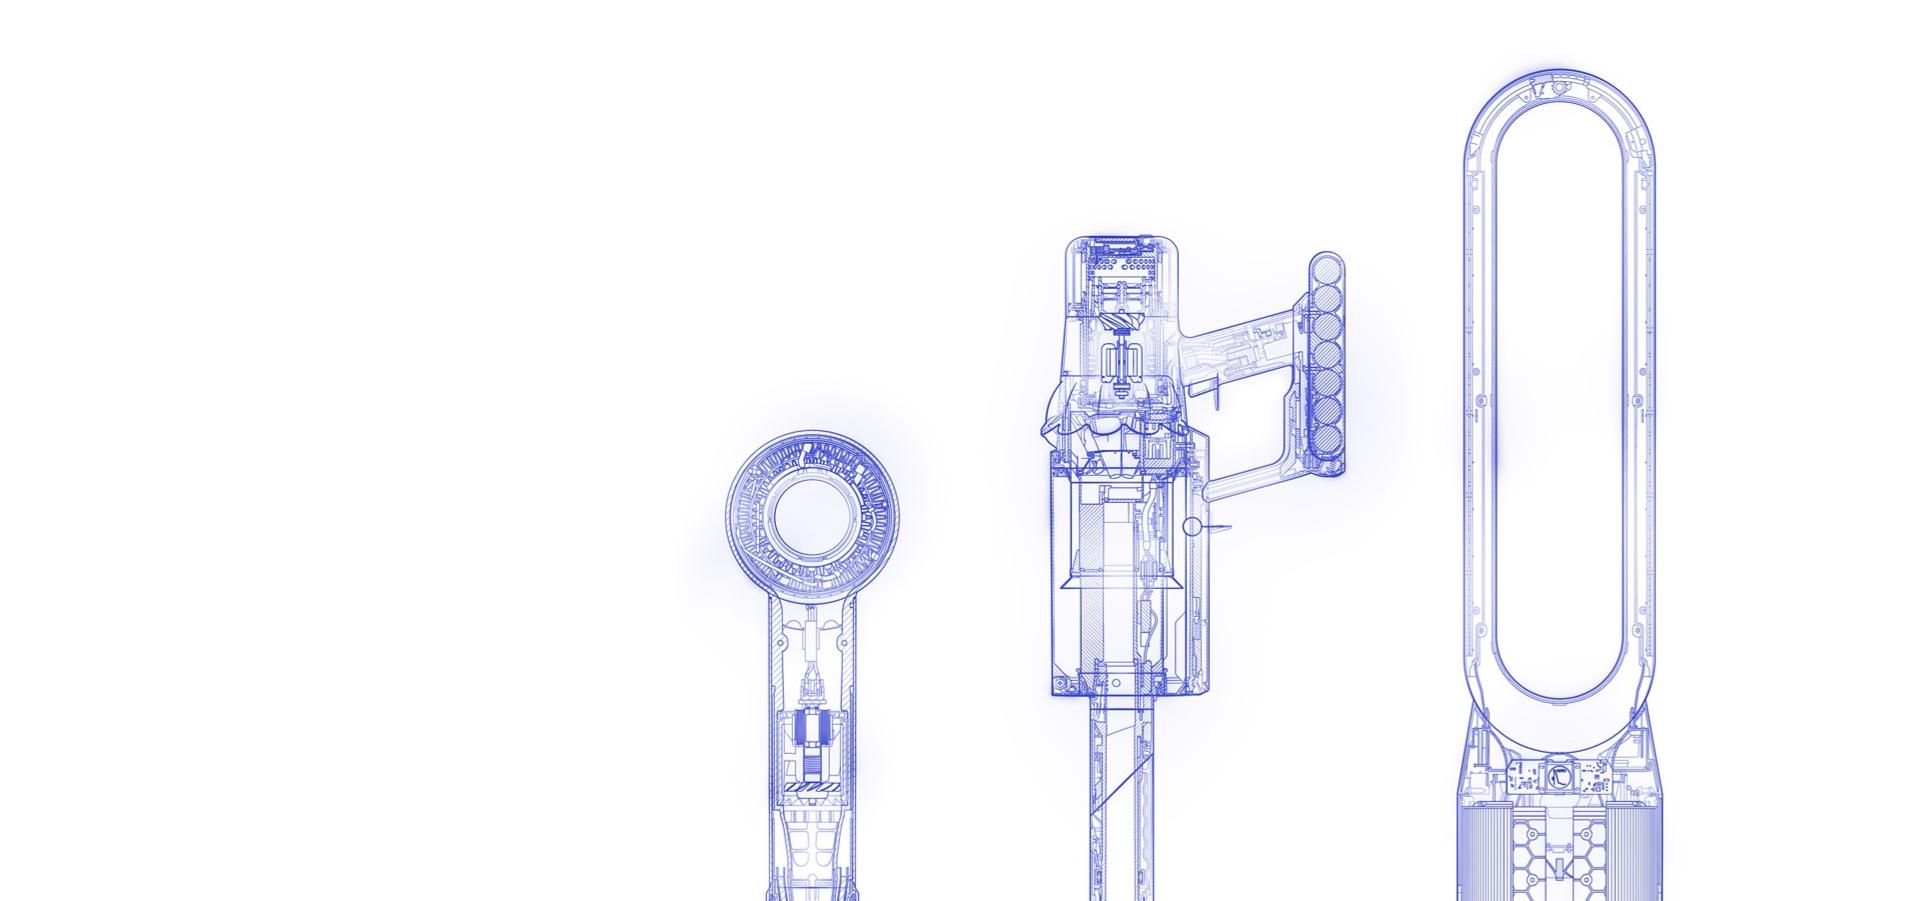 Cutaway technical drawings of Dyson machines